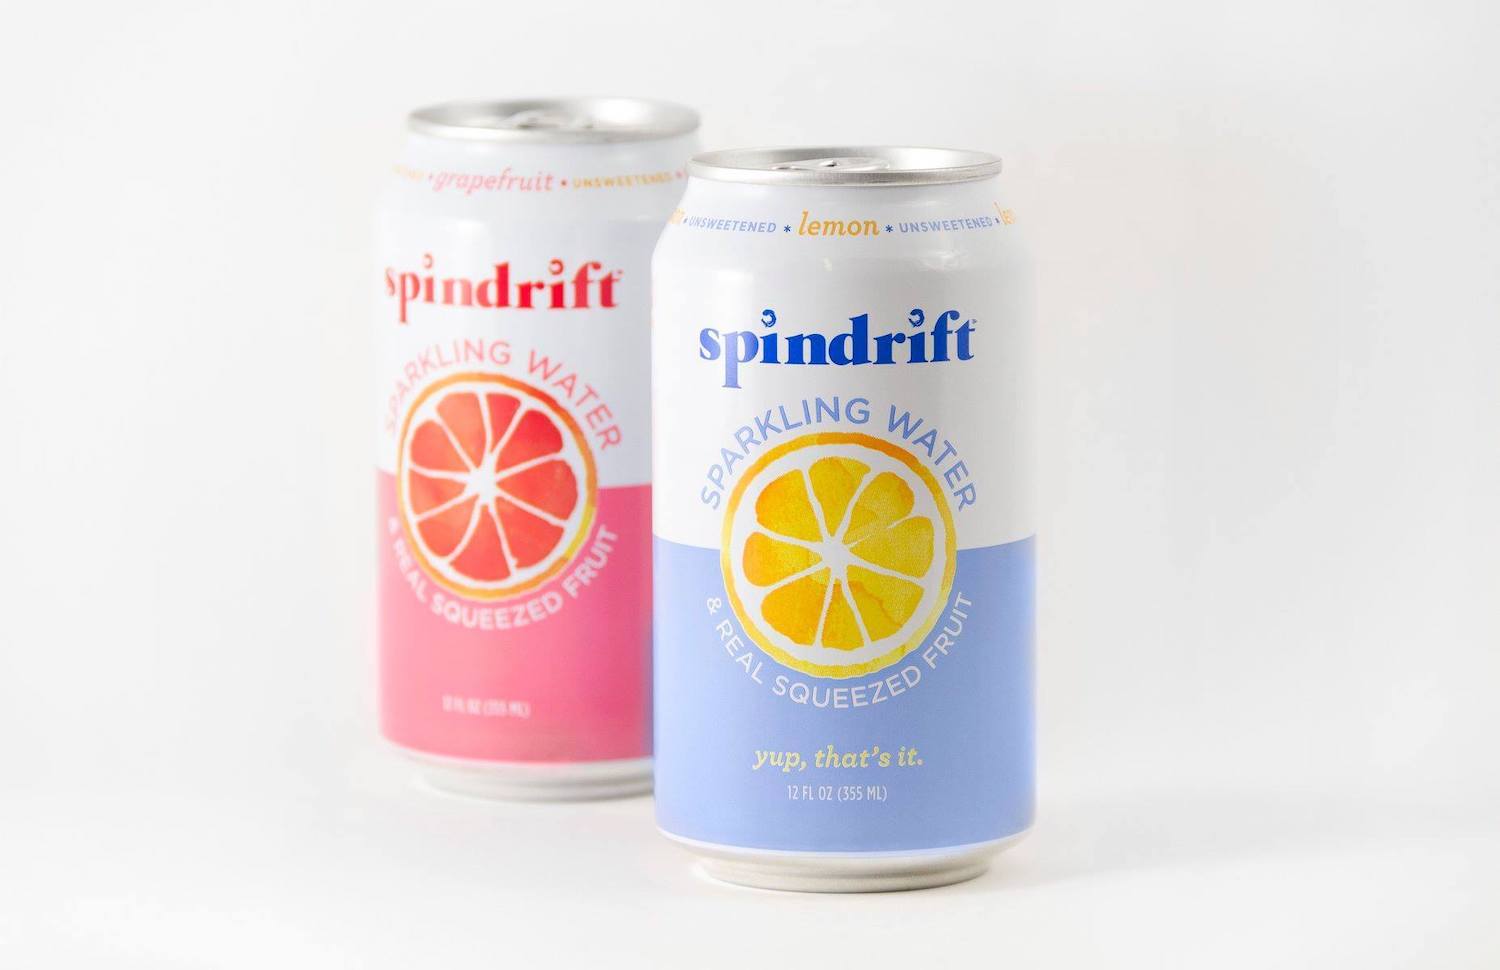 Spindrift Sparkling Water product shot. October 2020